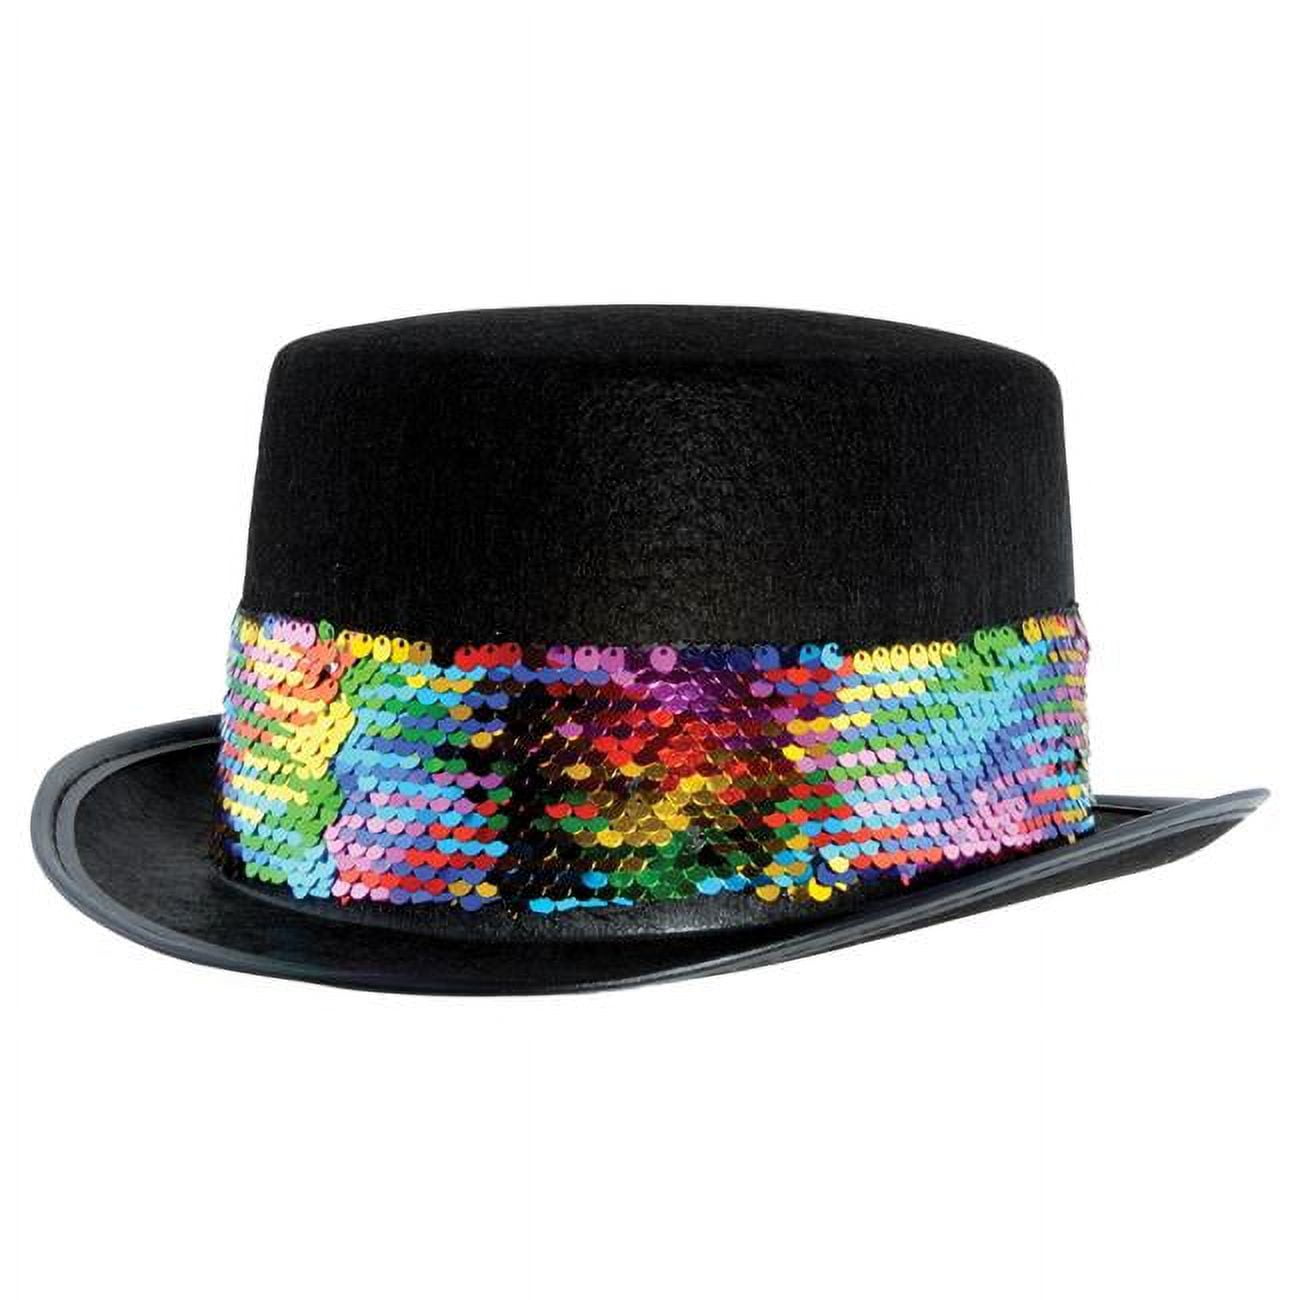 Picture of Beistle 60971 Felt Topper Hat with Rainbow Sequined Band